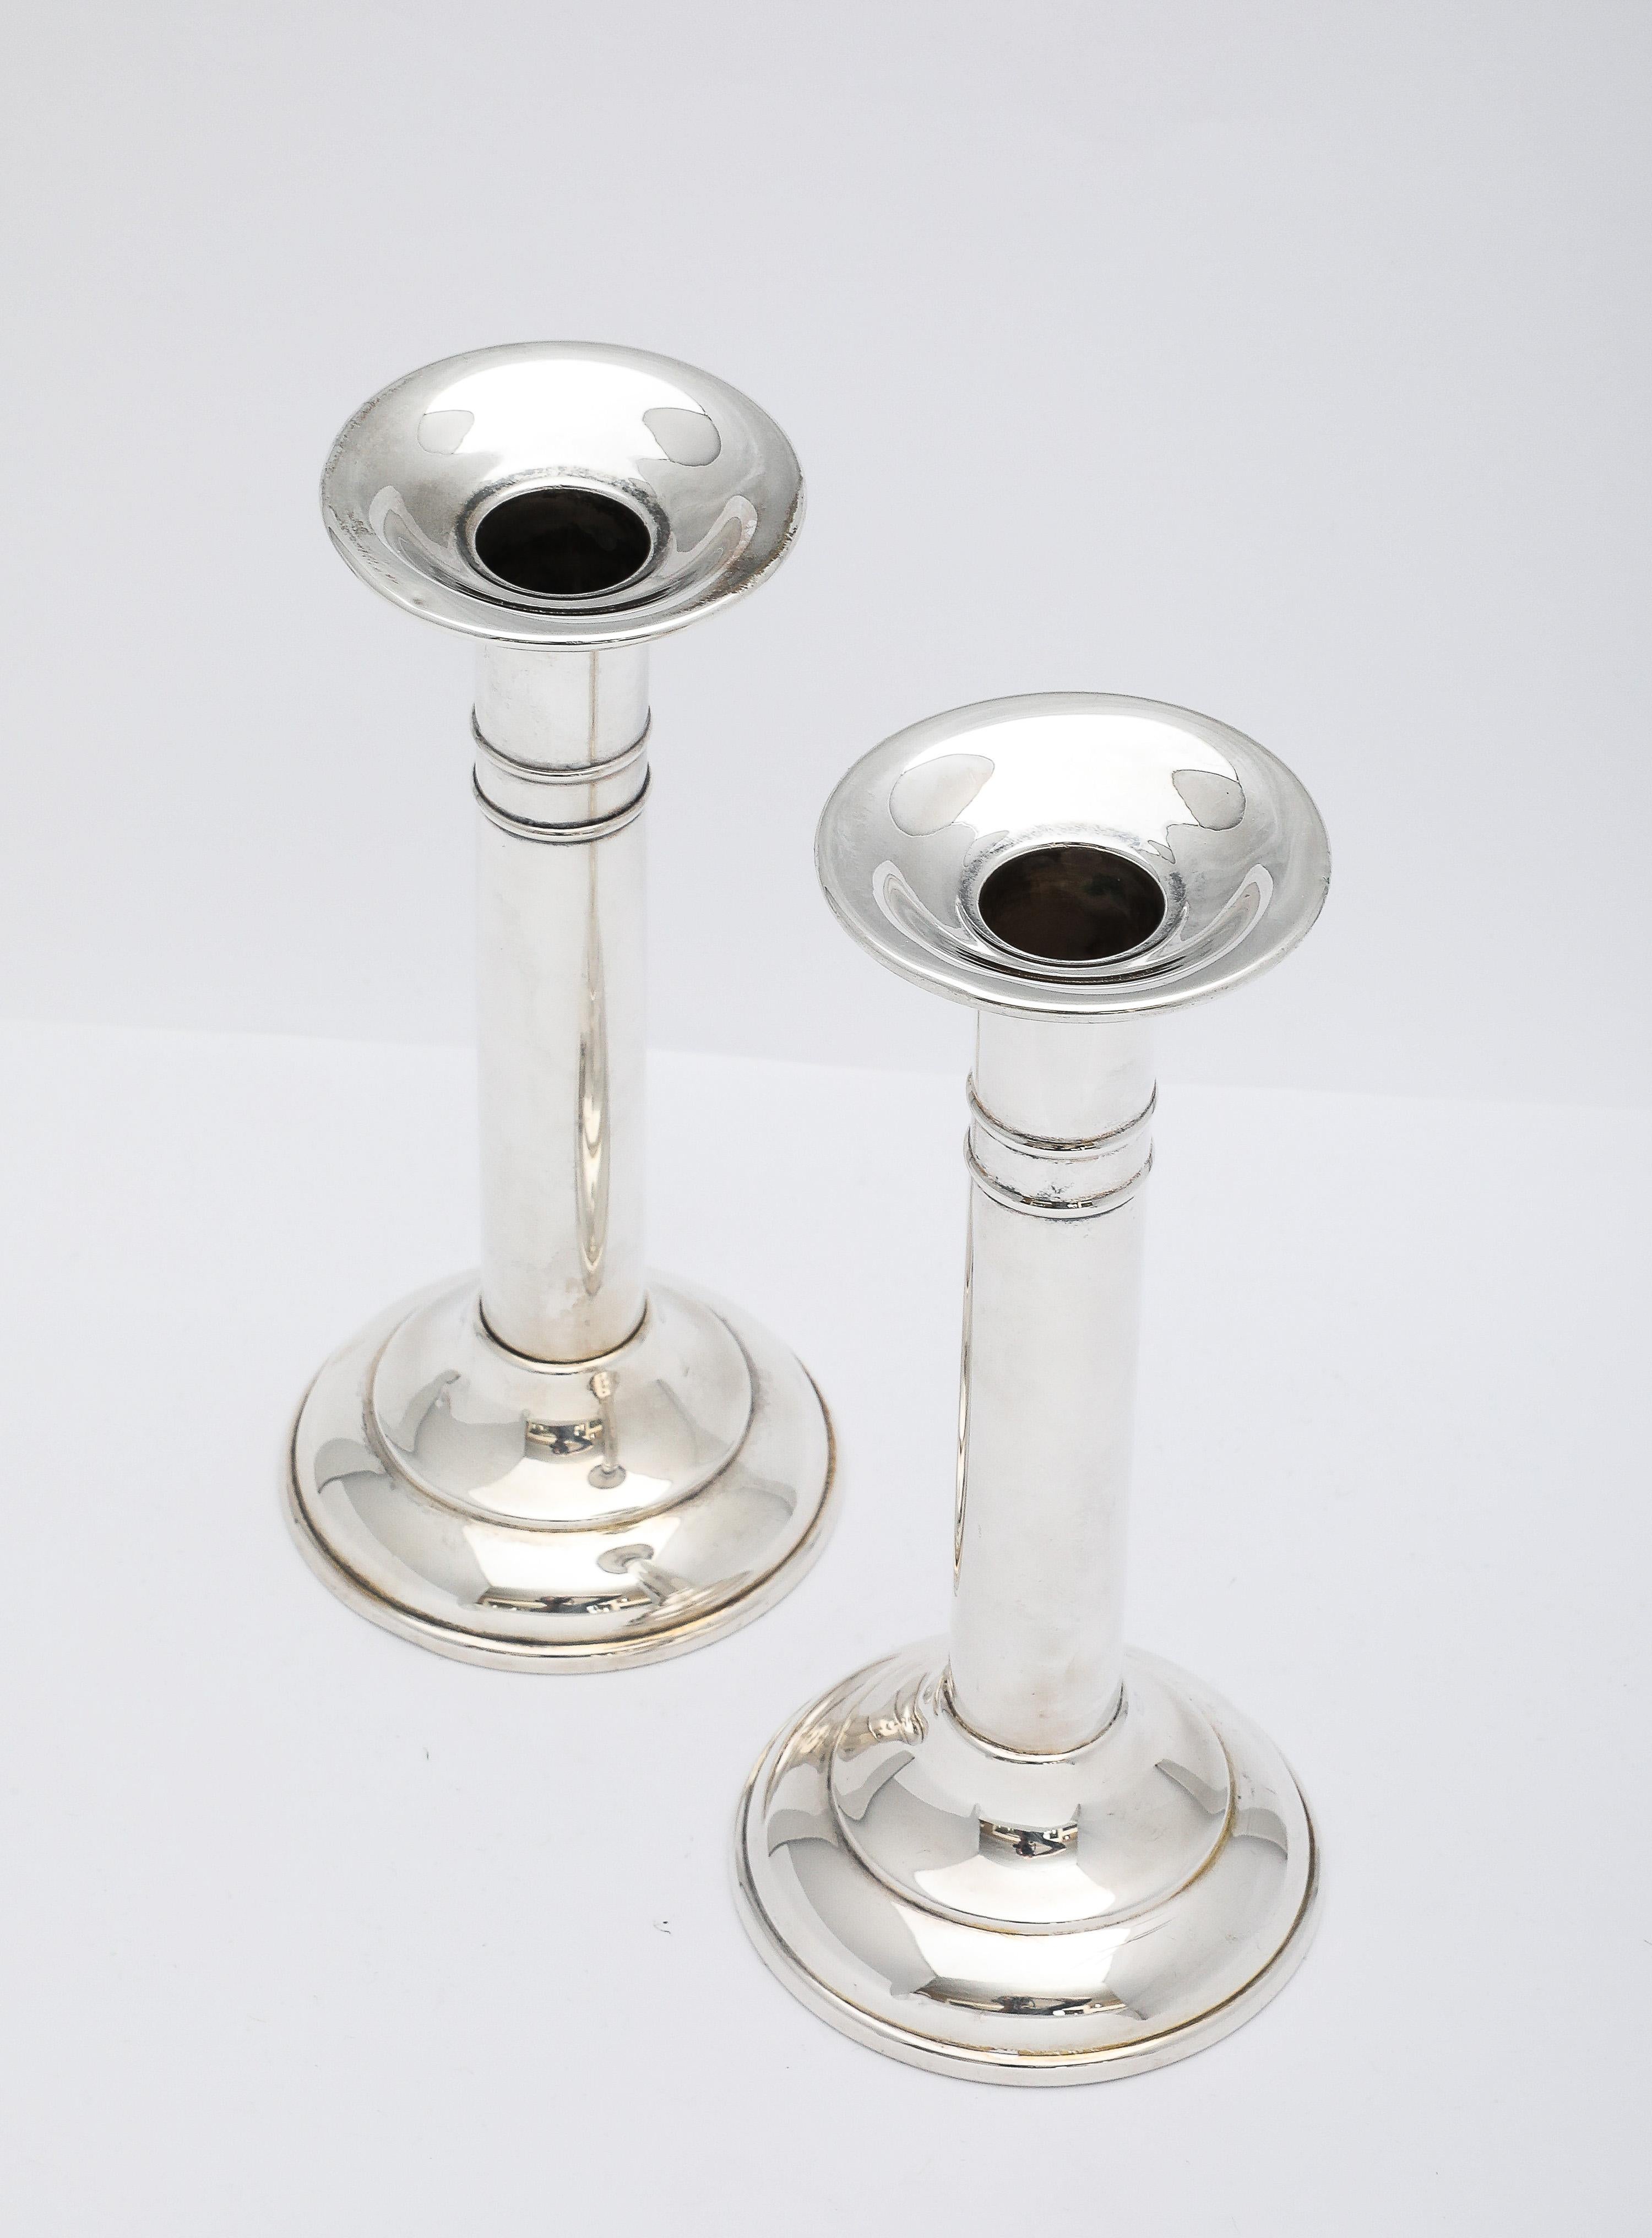 Pair of Edwardian Period Sterling Silver Candlesticks For Sale 9